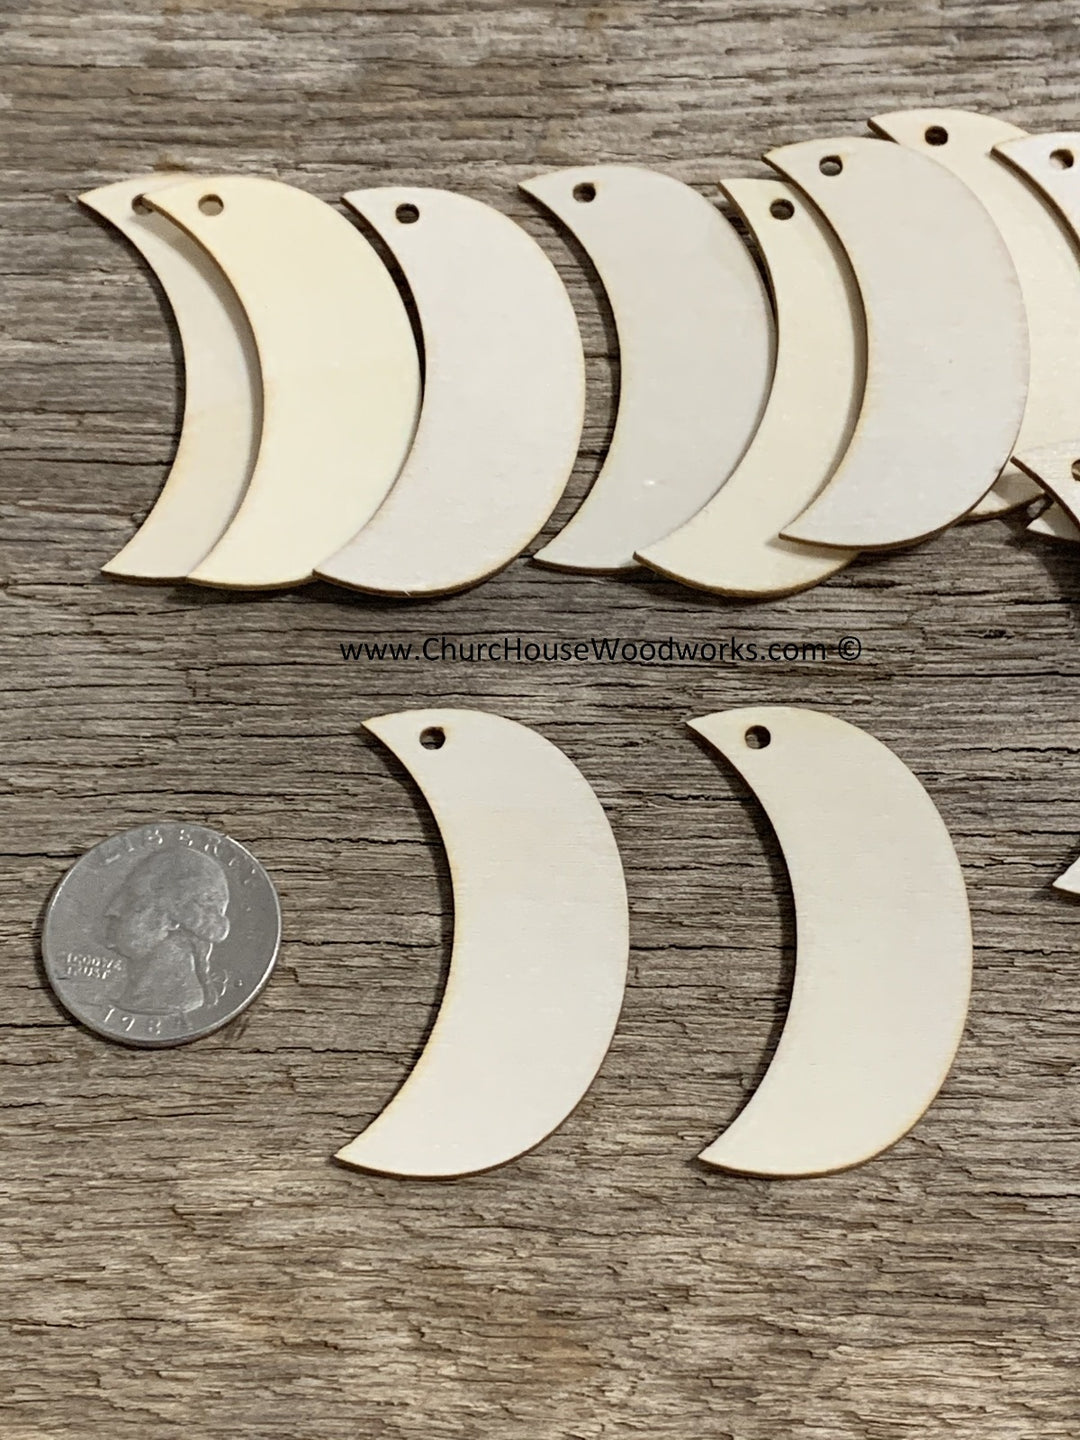 Wood crescent moon earring blanks for crafts tags 25 qty 2 inch by ChurchHouseWoodworks.com